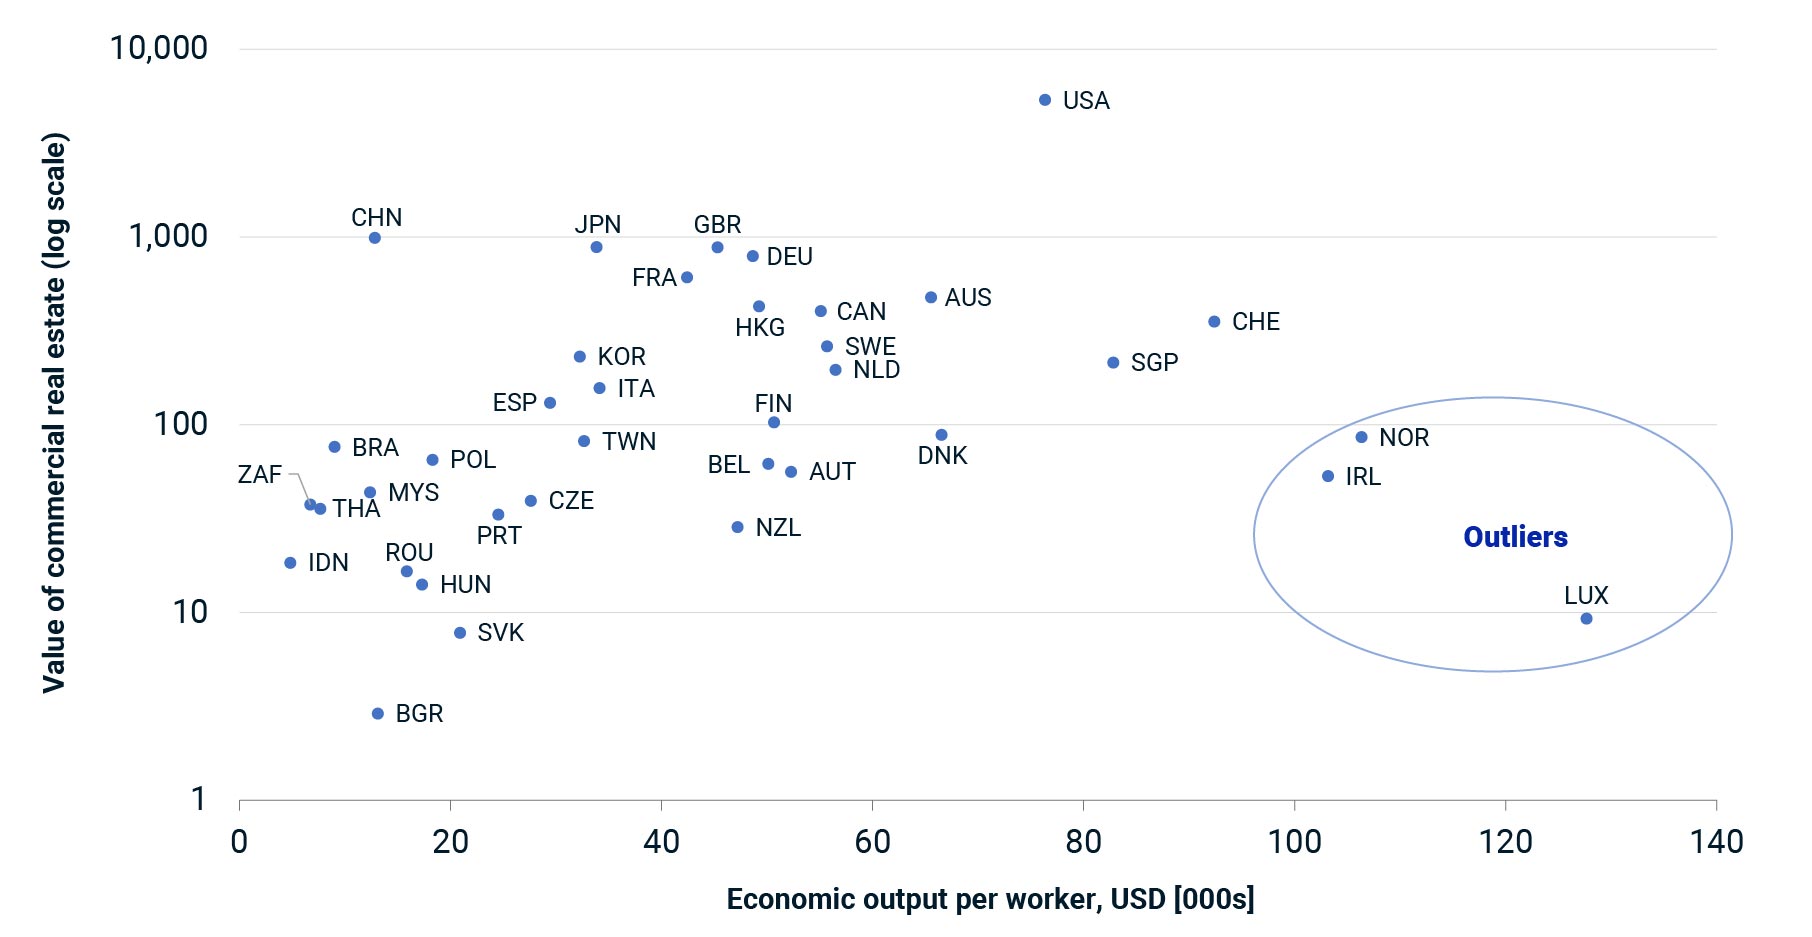 This scatterplot shows the relationship between the size of a country's commercial real estate market and the GDP output per worker. 